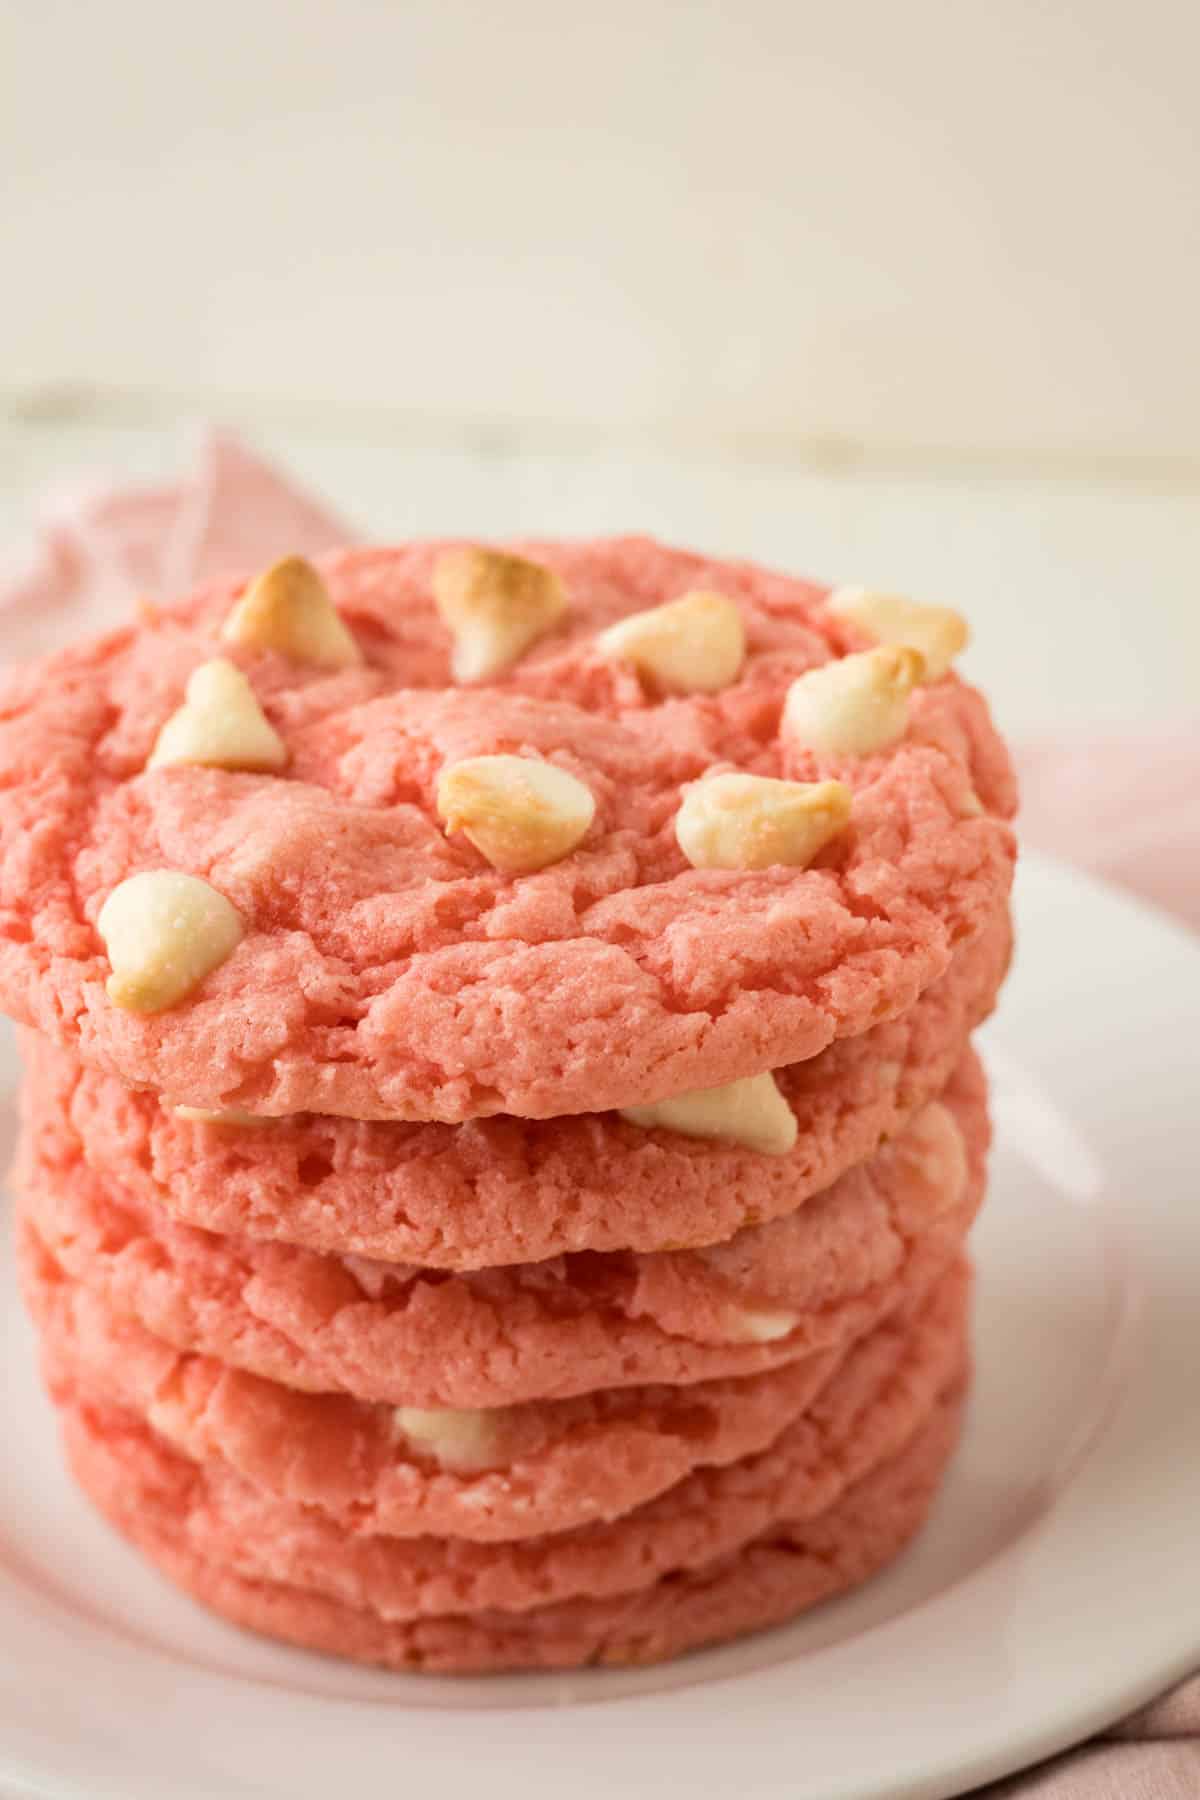 A stack of pink cookies with white chocolate chips made with strawberry cake mix.